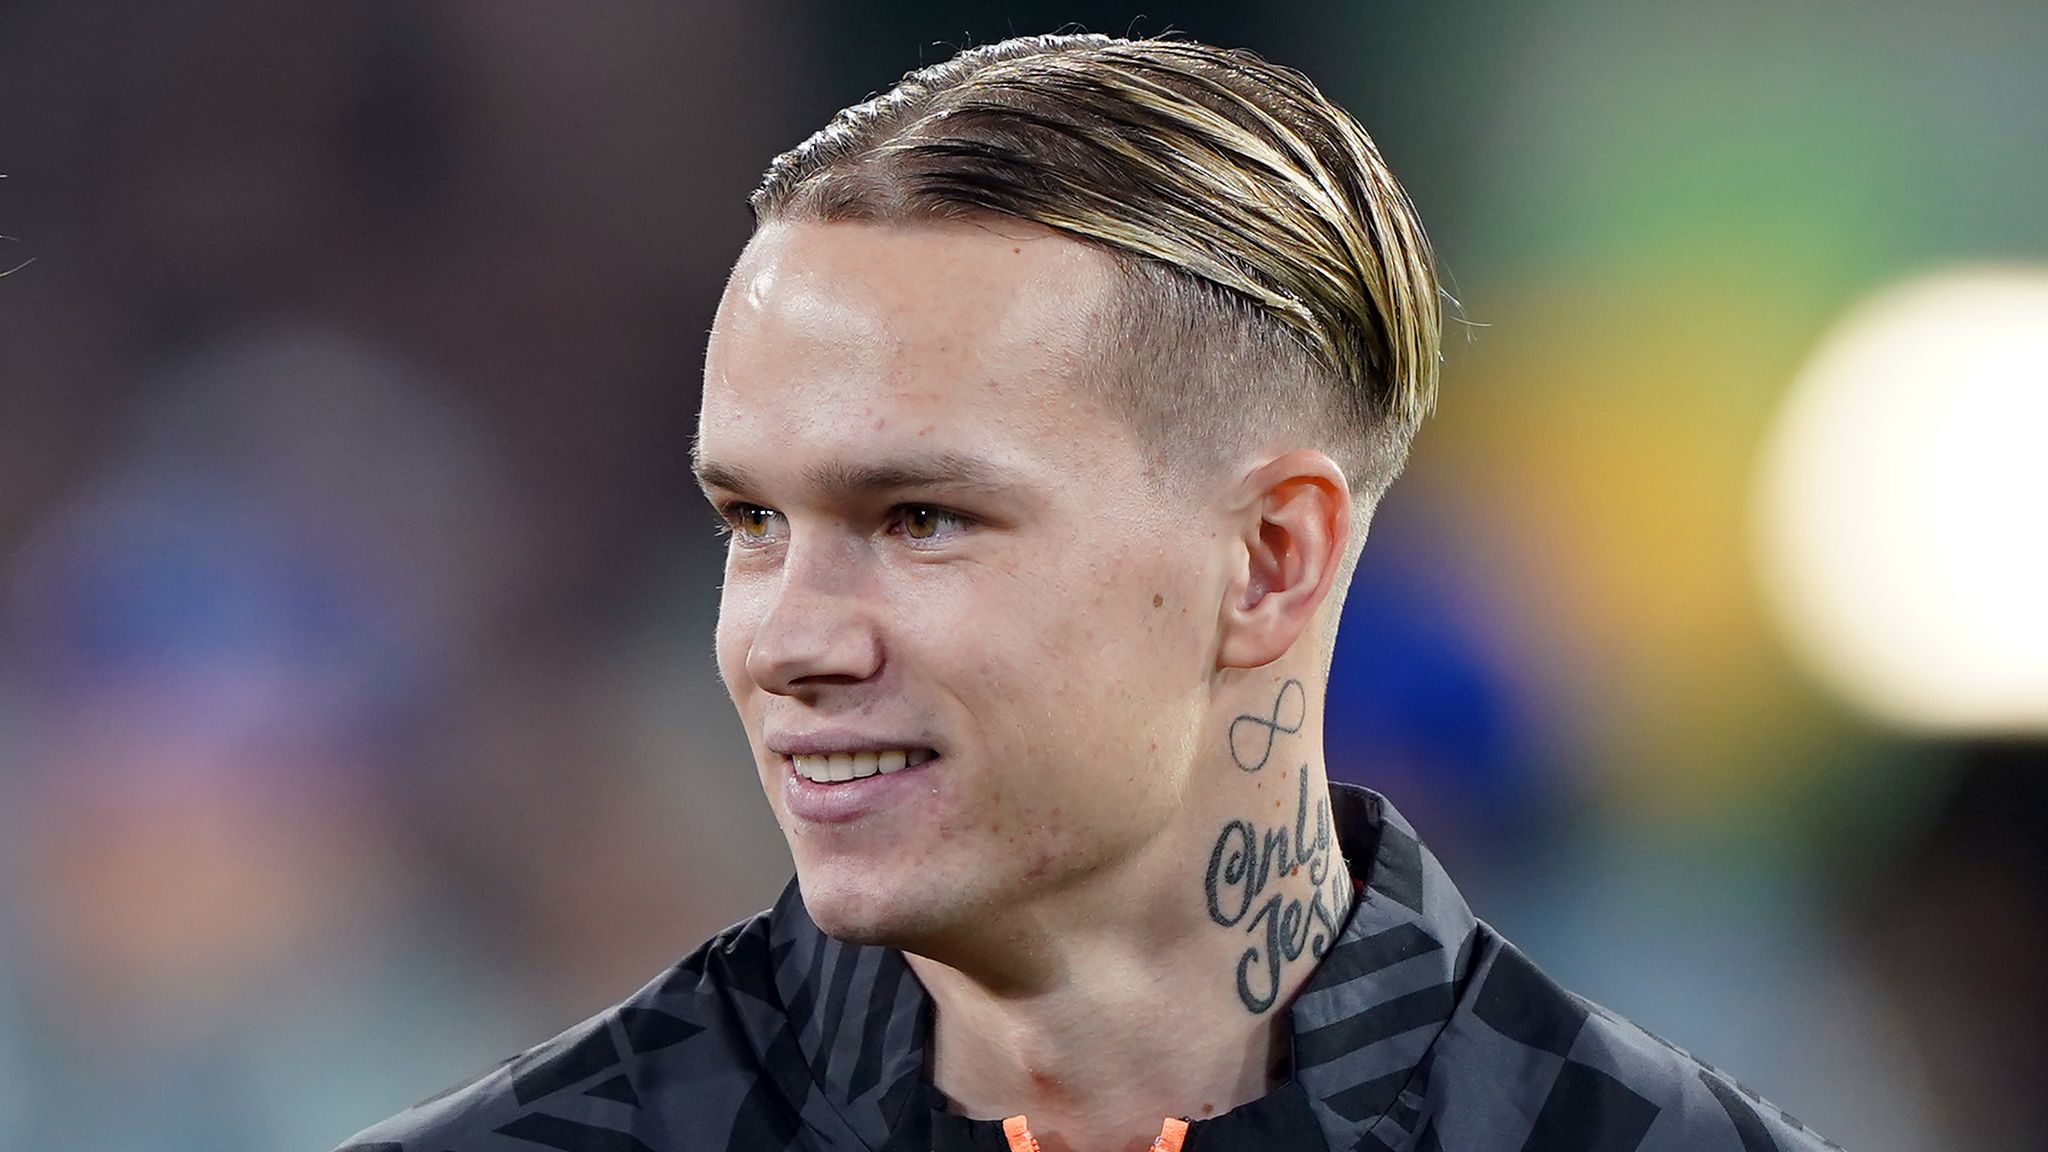 Mykhailo Mudryk: Arsenal and Chelsea target in demand after rapid rise to prominence with Shakhtar Donetsk | Football News | Sky Sports